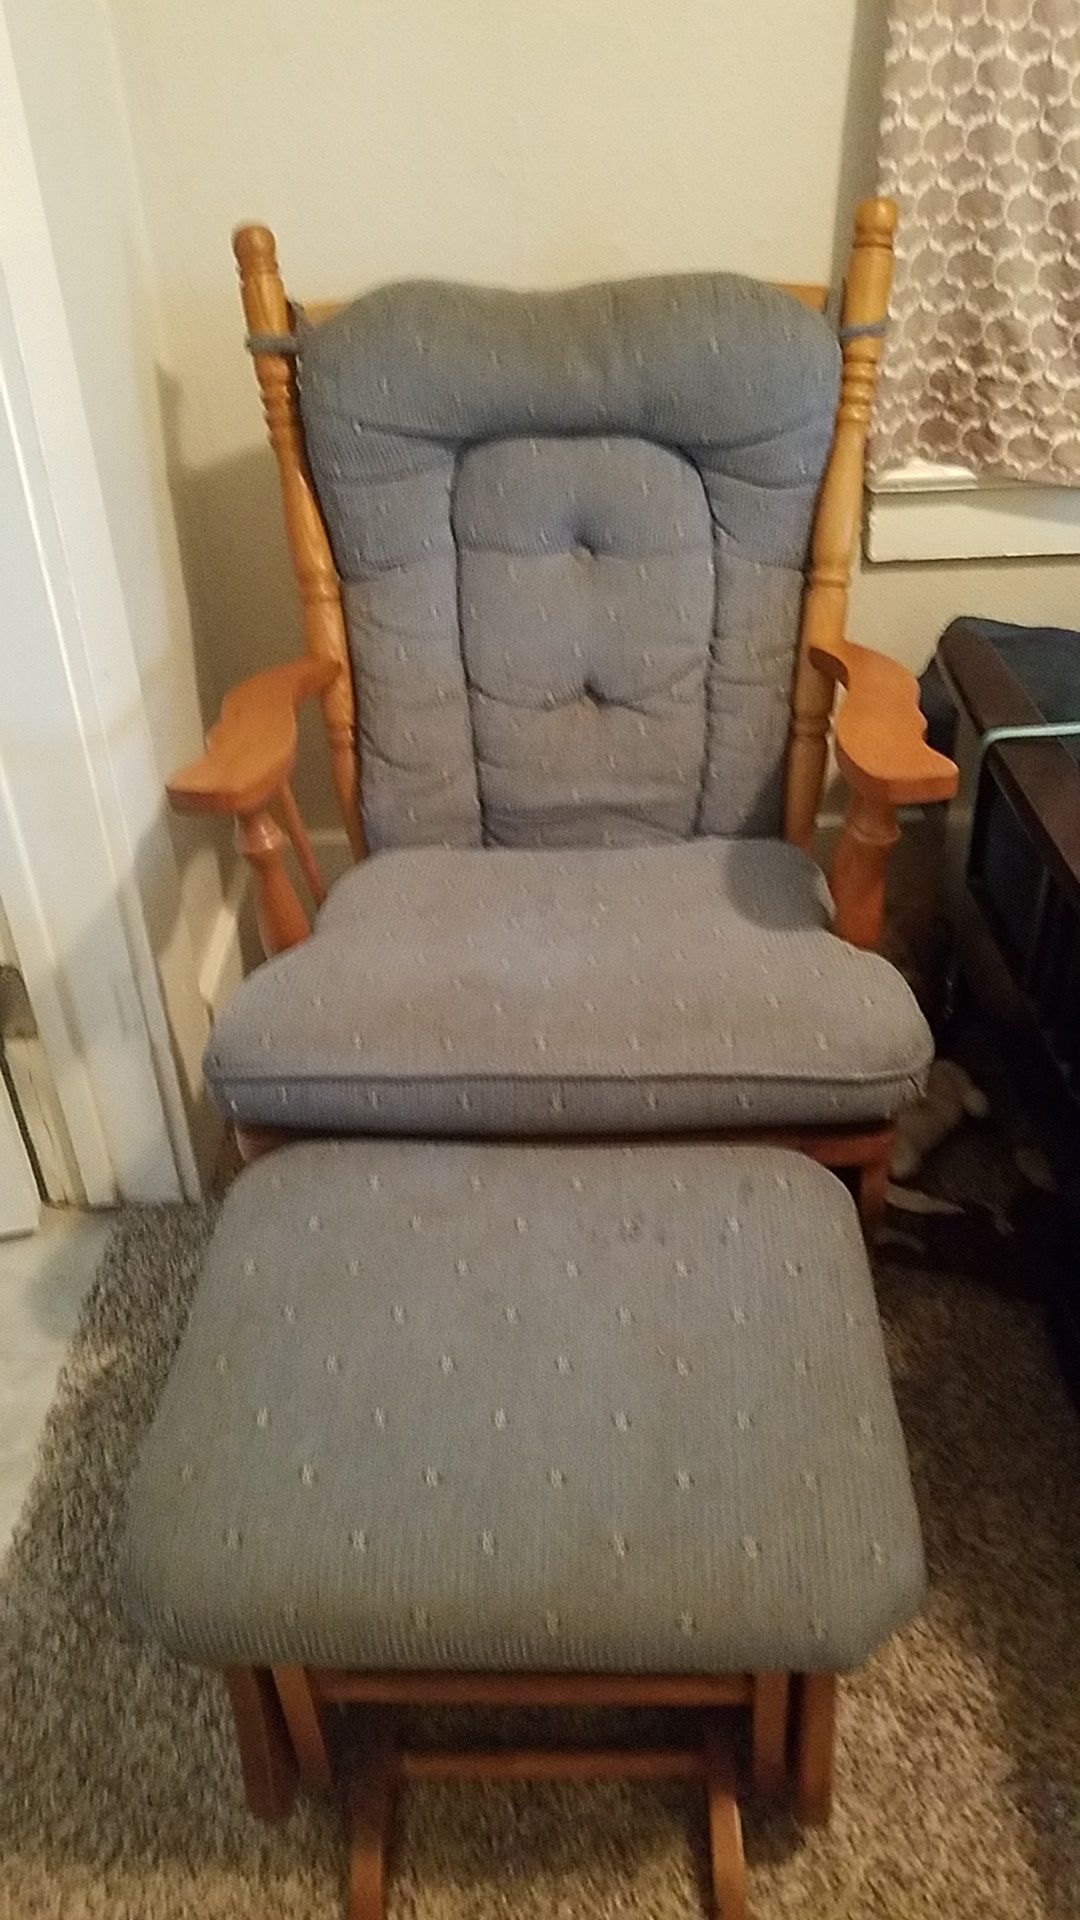 Rocking chair w/ matching ottoman in excellent condition